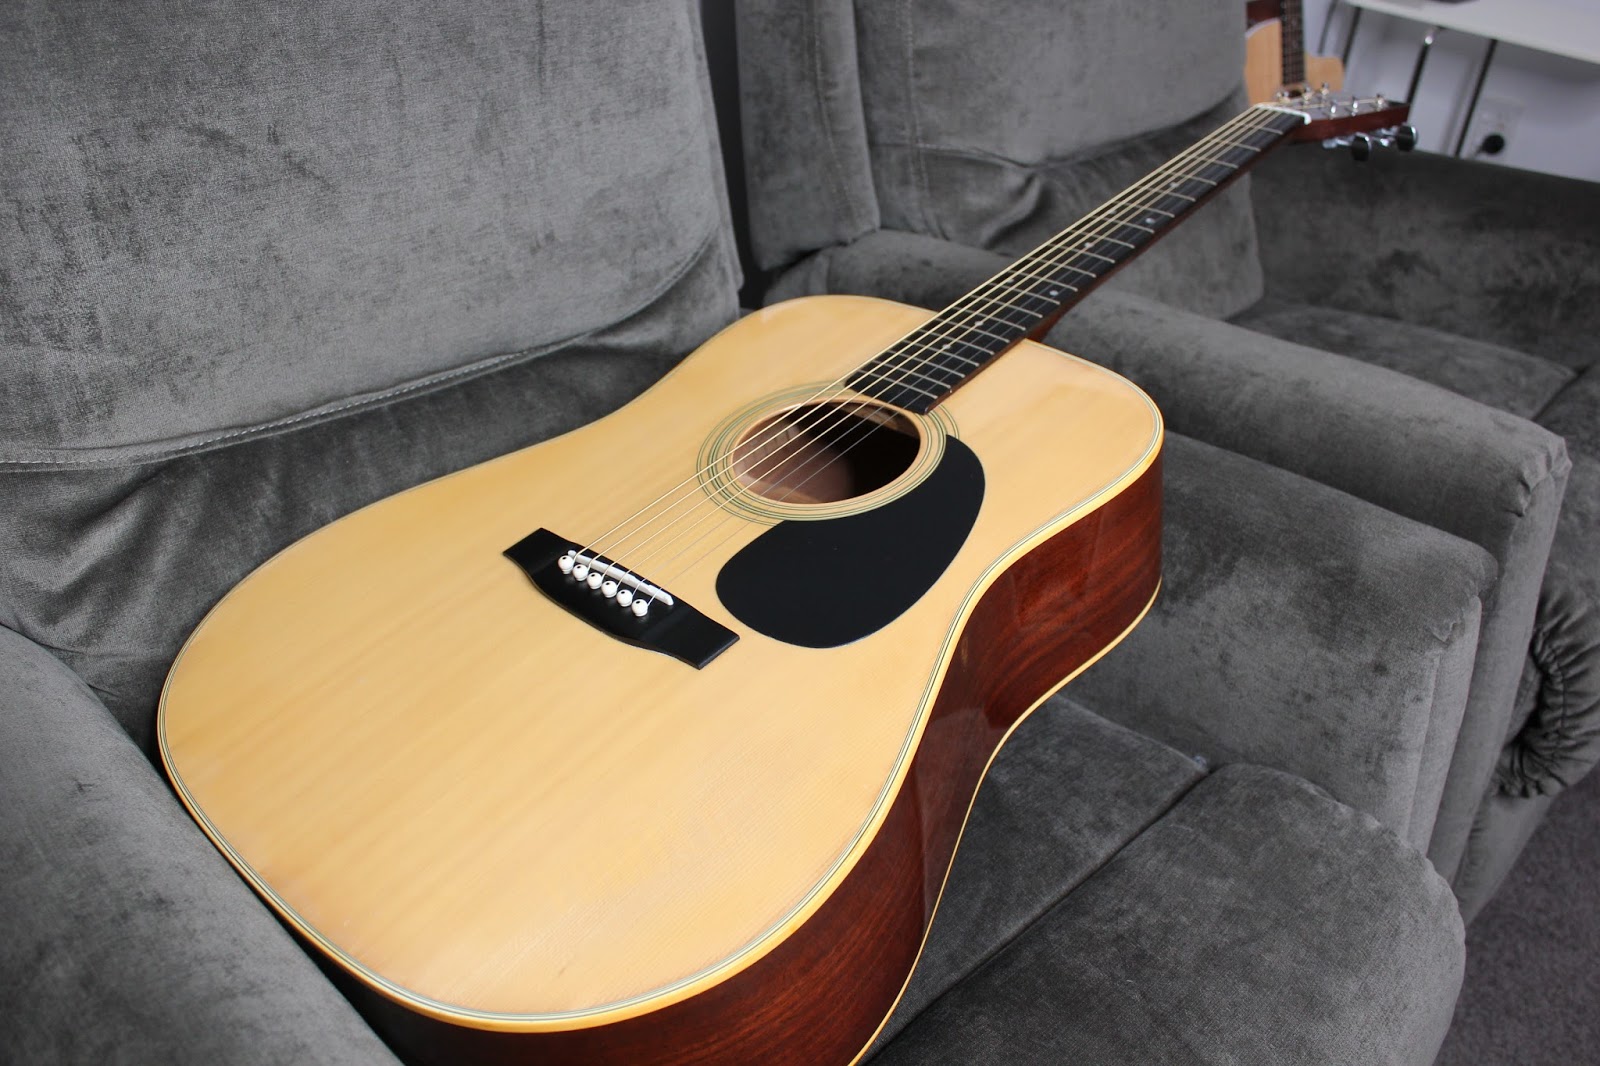 Edwin's Guitar Journey: Morris W18 Acoustic Guitar Demo with Martin